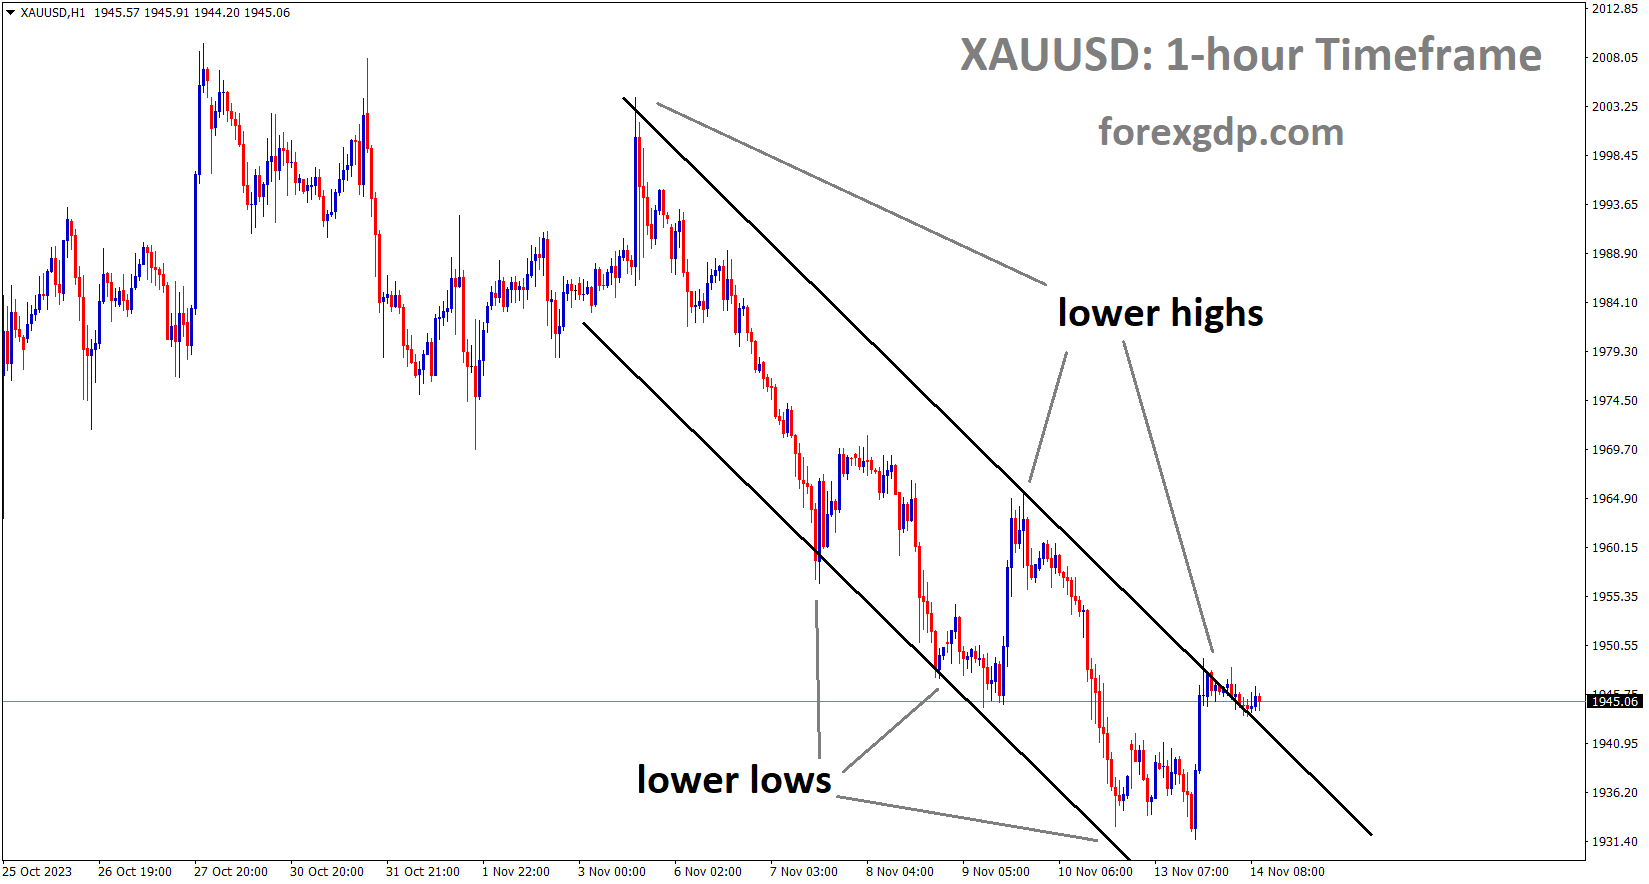 XAUUSD Gold price is moving in the Descending channel and the market has reached the lower high area of the channel